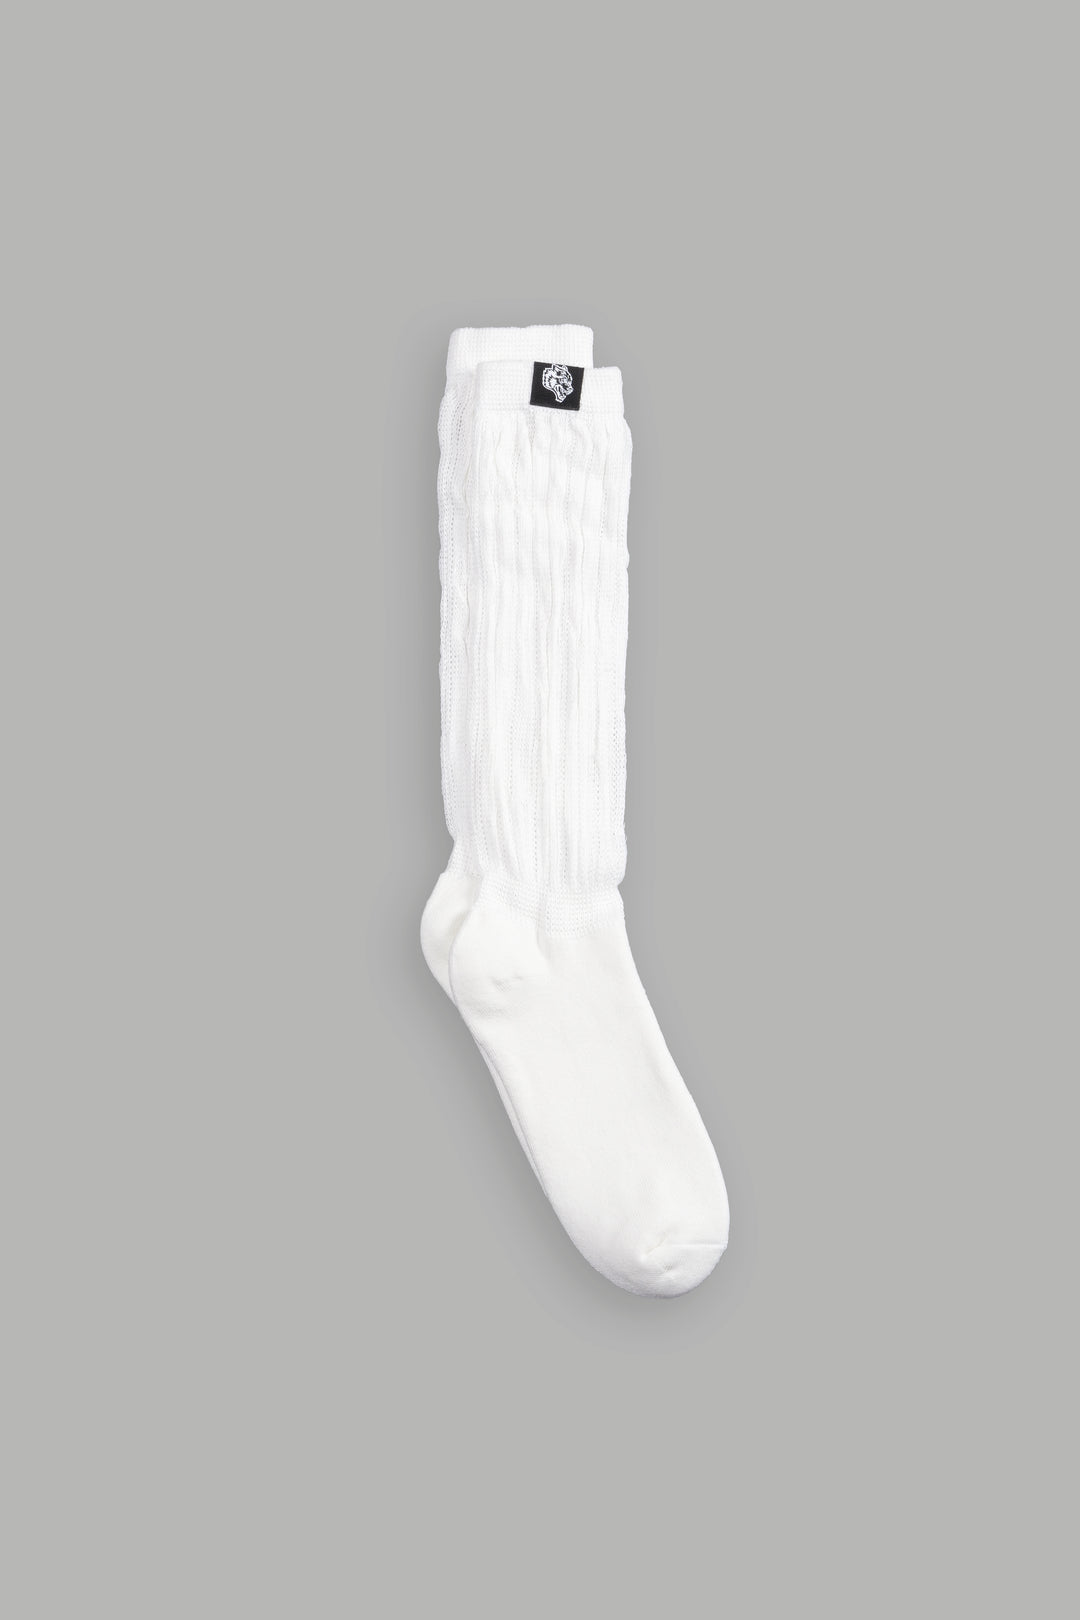 Wolf Patch High Rise Comfy Socks in Cream